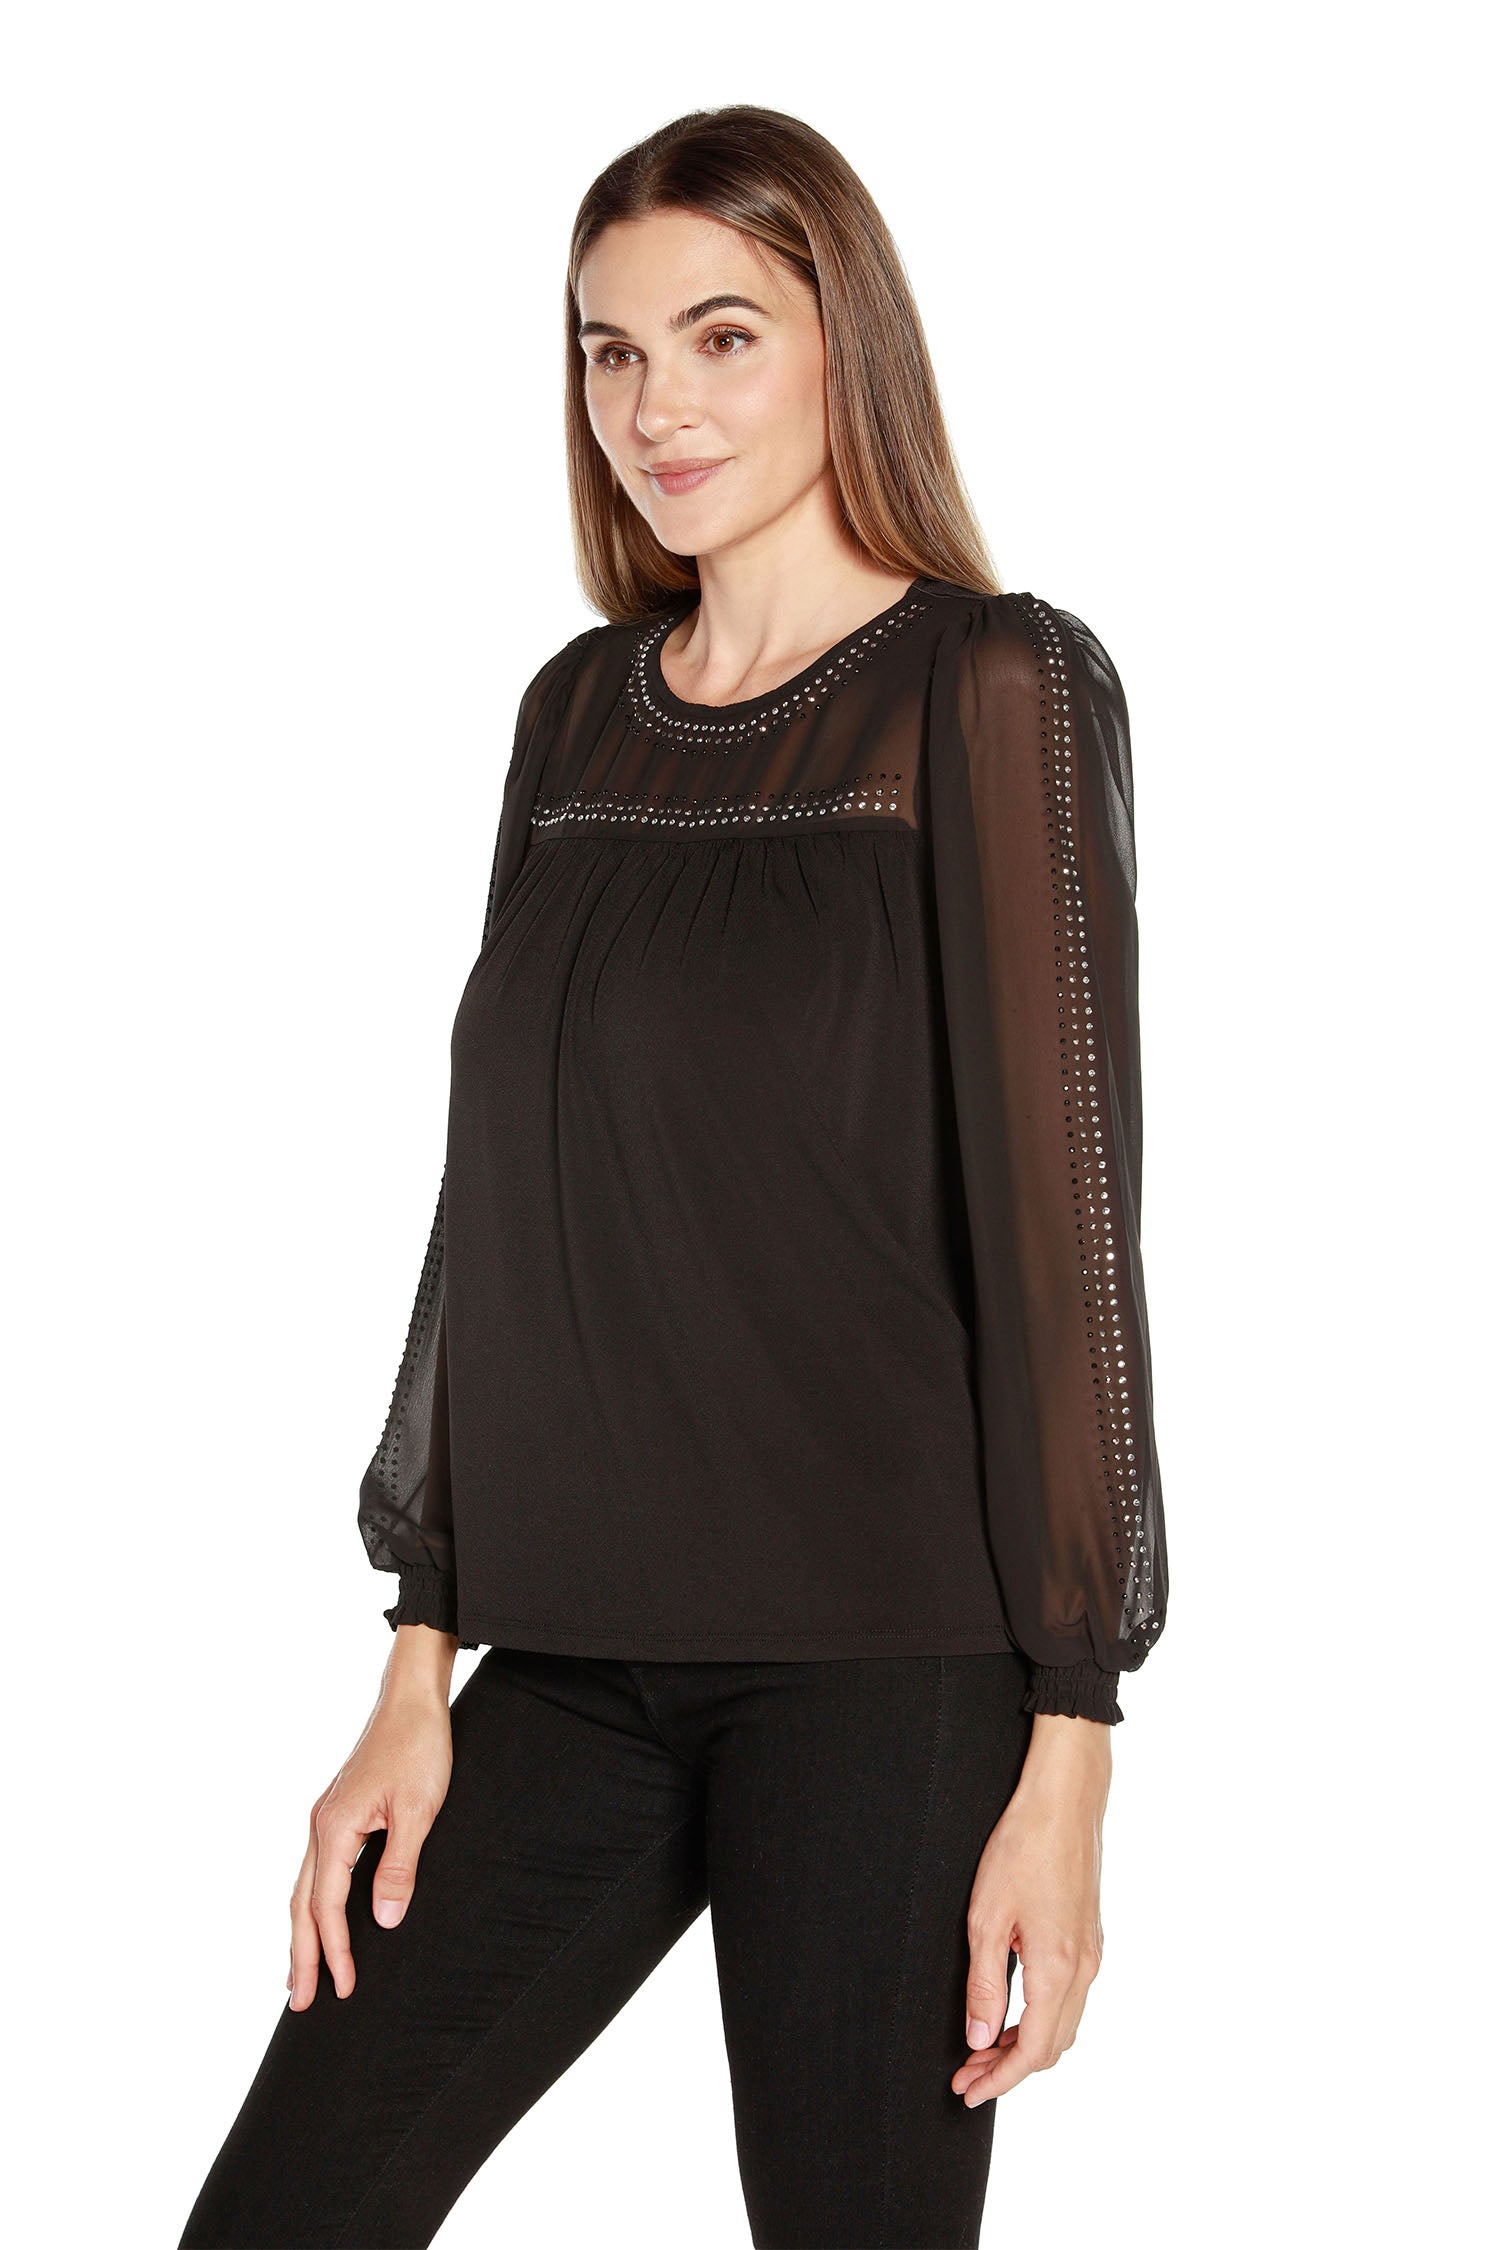 Women's Pullover Tunic with Sheer Yoke and Sleeves with Rhinestone Details